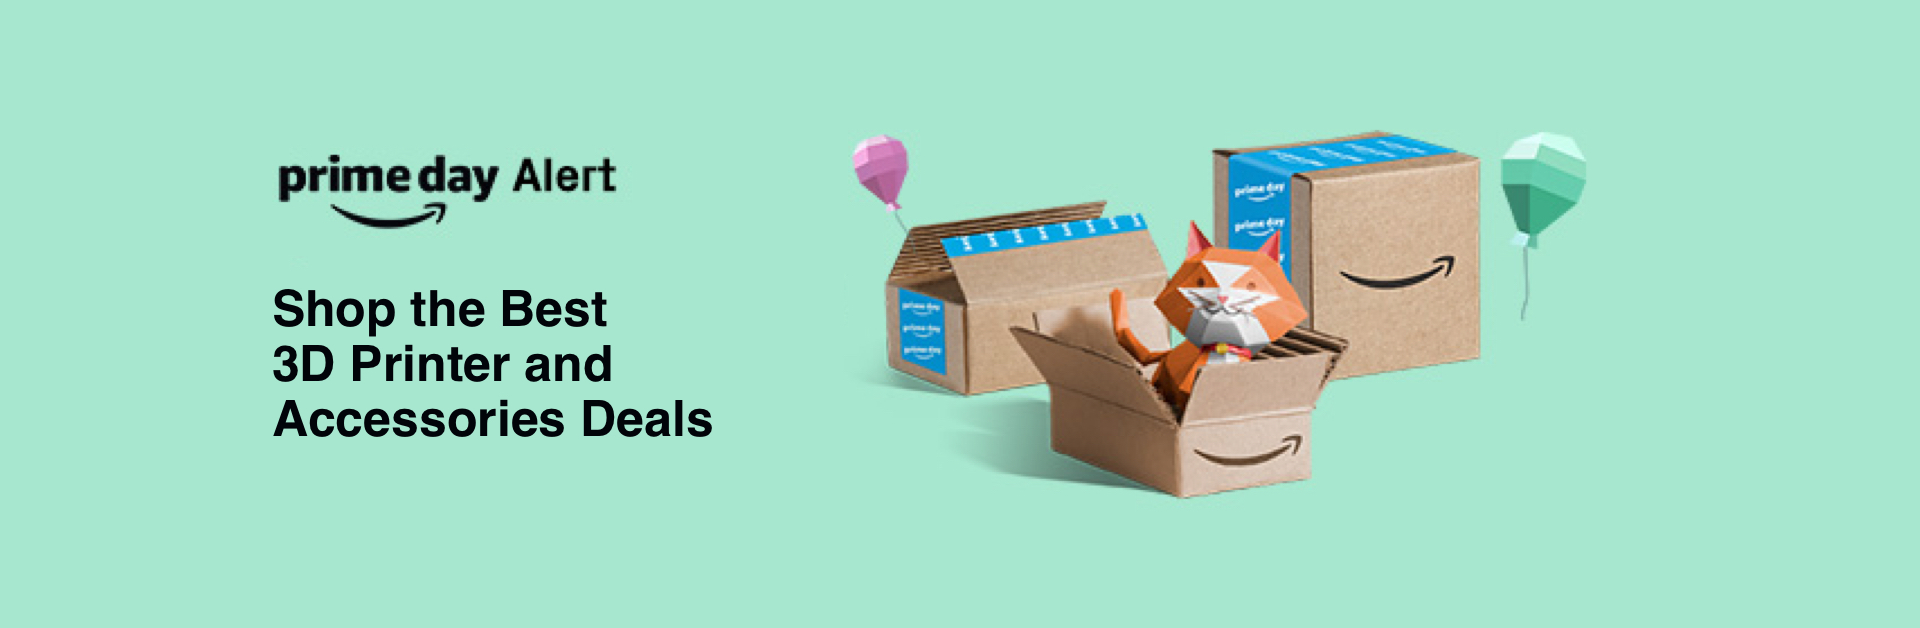 Amazon Prime Day Deal 2019, shop the best 3D printer and accessories deals